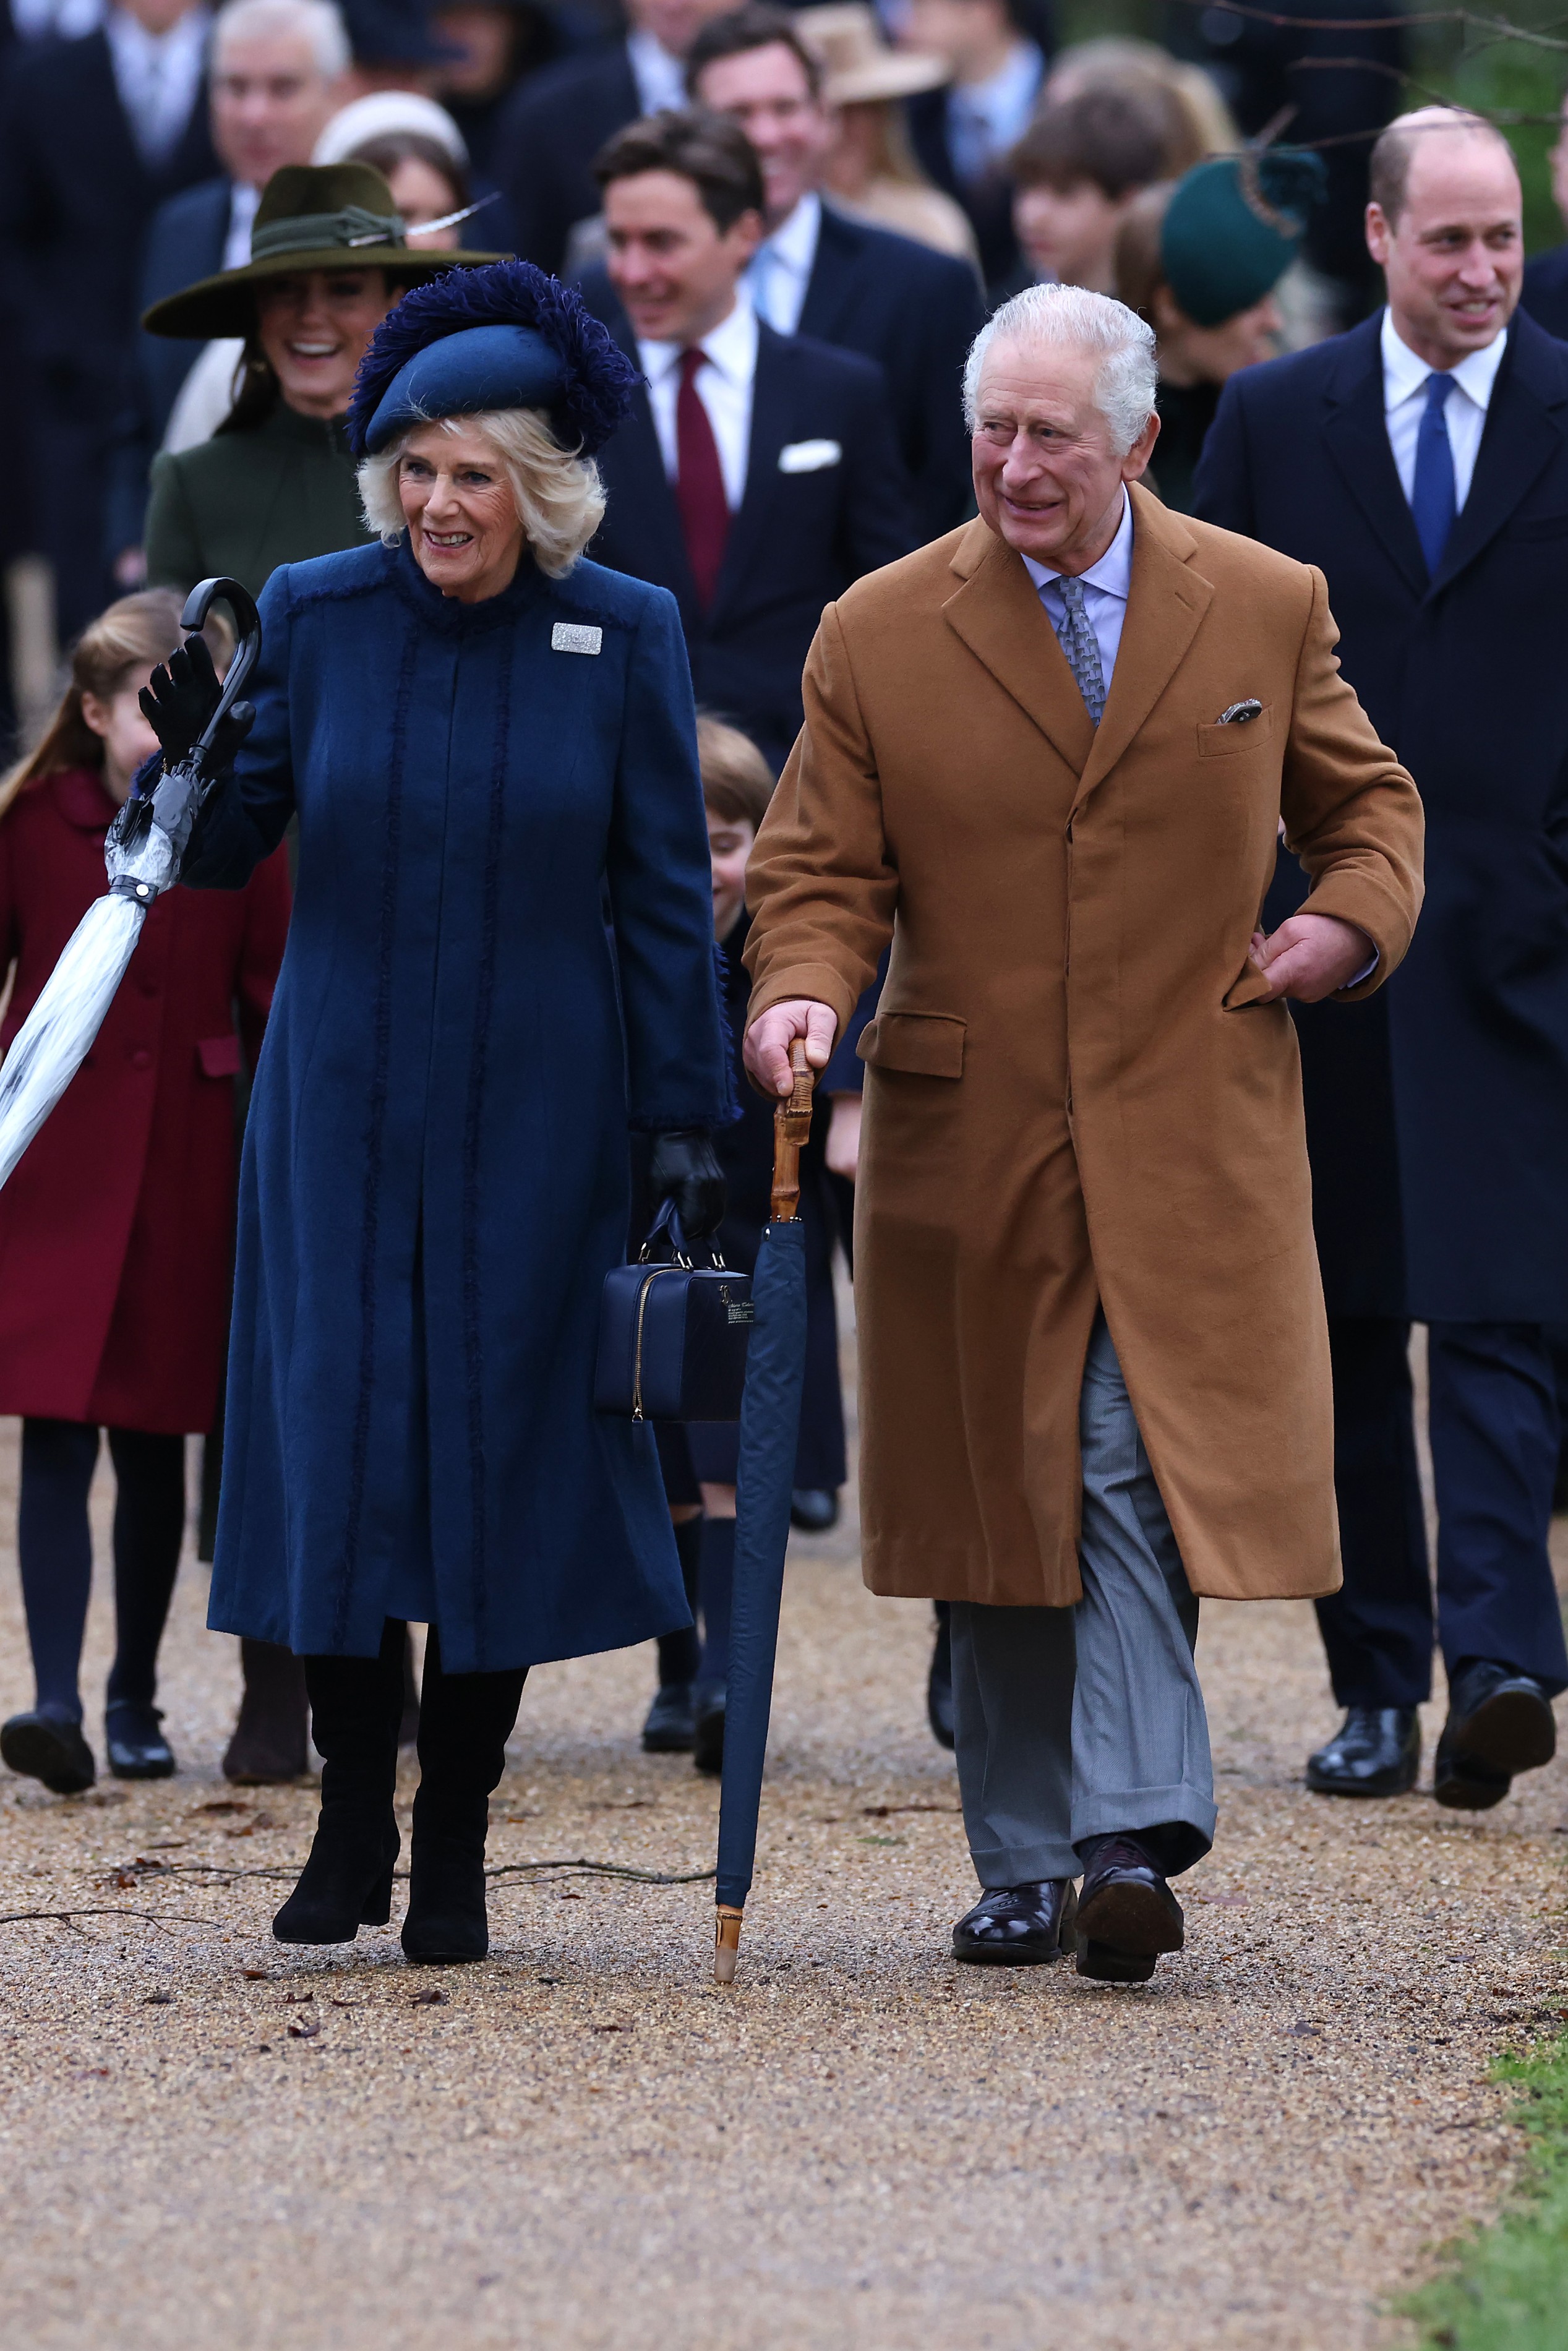 King Charles III and Queen Consort Camilla (Image: Getty Images)